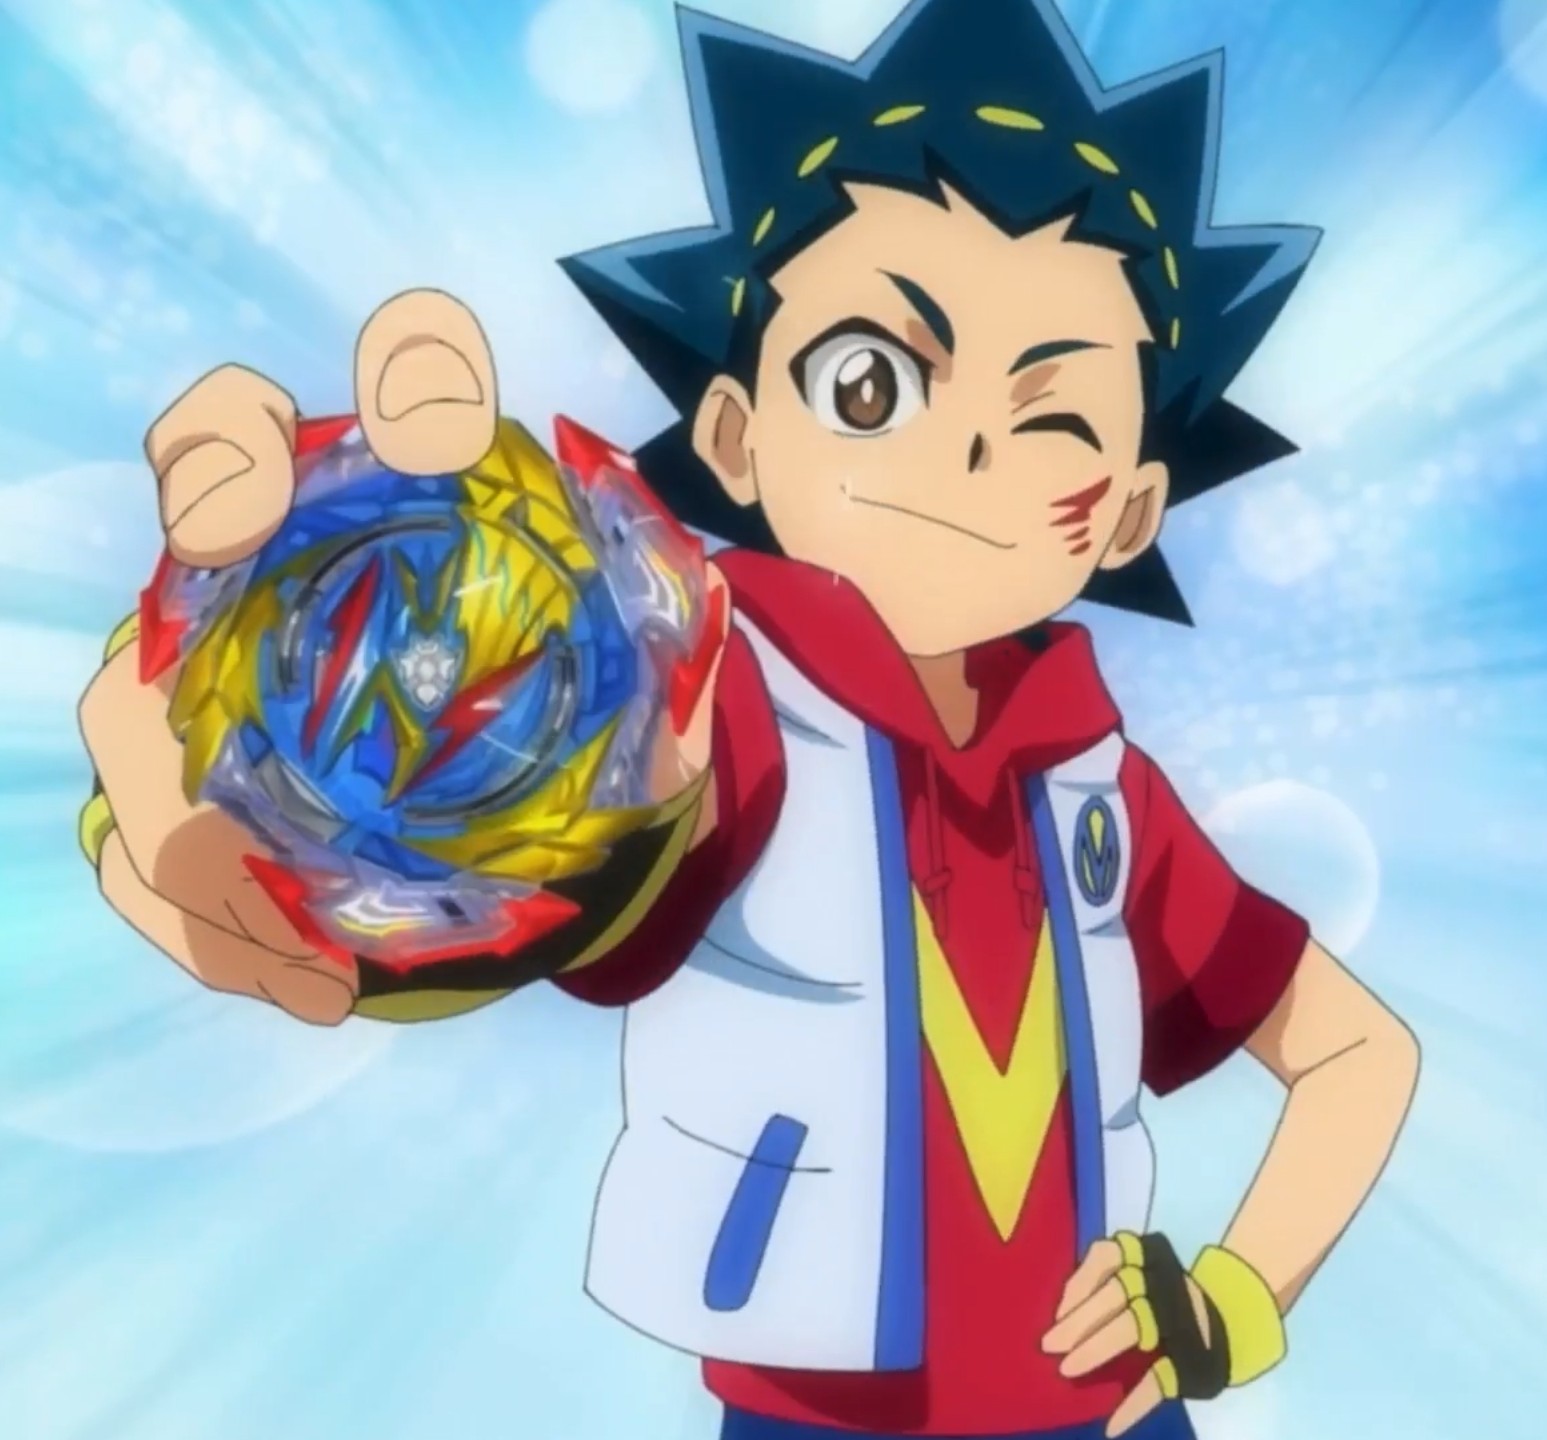 10 Coolest Beyblades In The Anime, Ranked